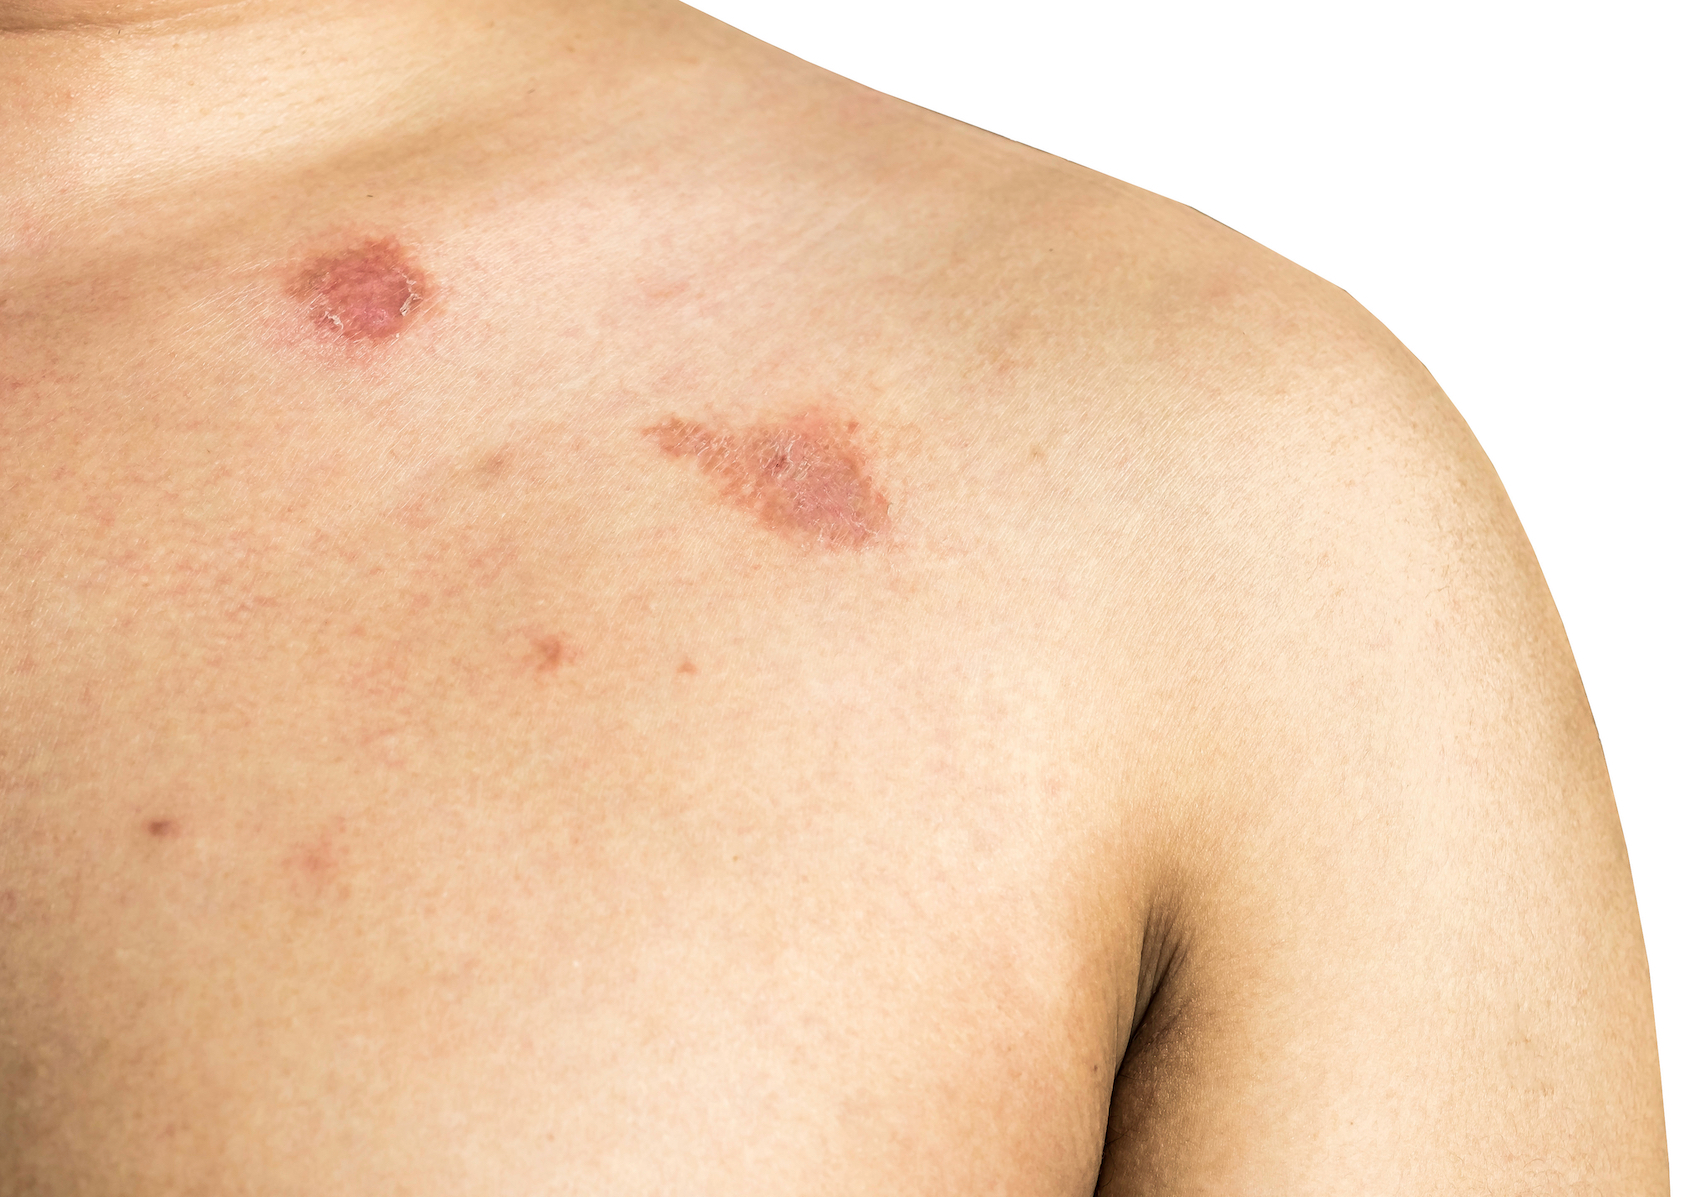 The Red Circle On Your Skin Might Not Be Ringworm; What Else Could It Be?